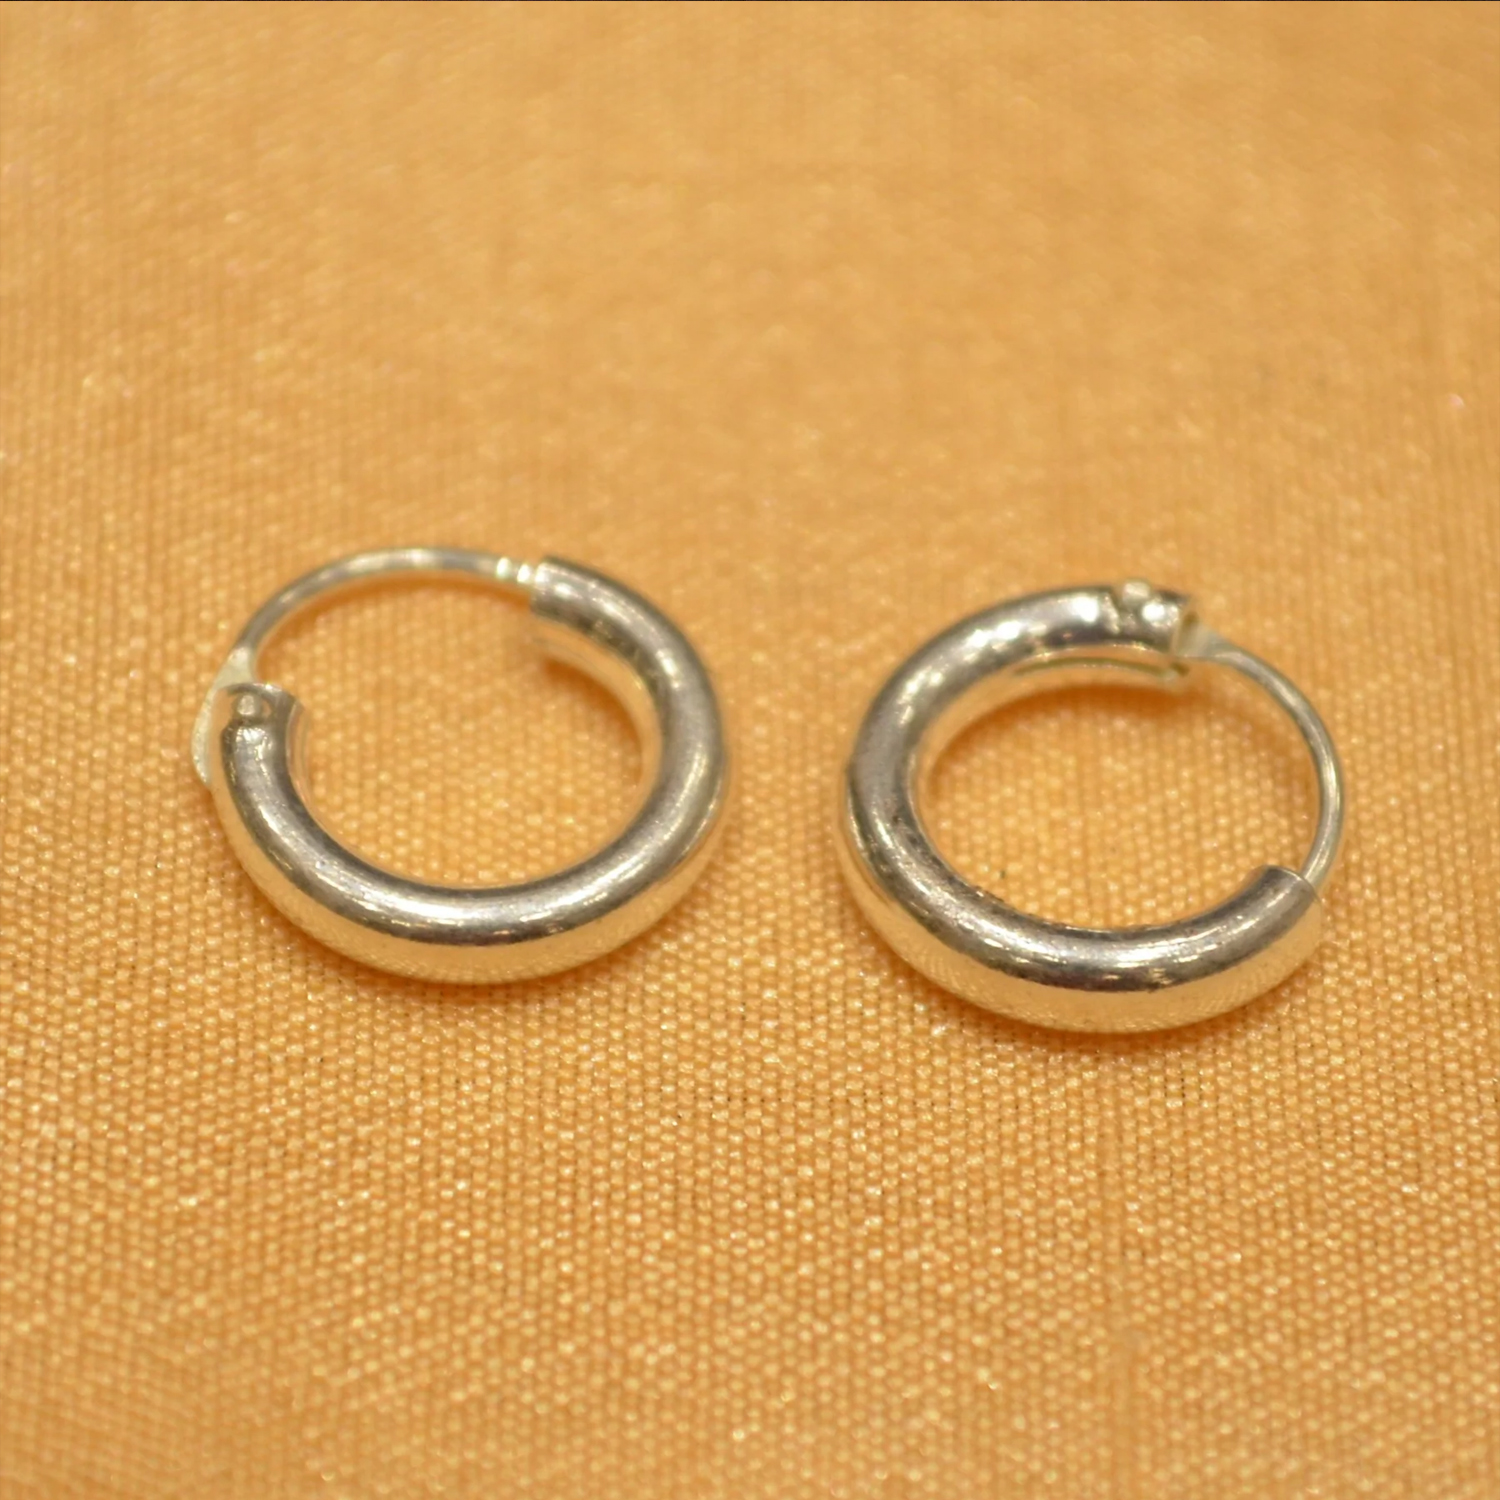 Amazon.com: 3 Pairs Handmade 925 Sterling Silver Nose Ring Hoop Small Hoop  Earrings set for Cartilage Tragus Helix Multiple Piercing Jewelry 6mm 7mm  8mm : Handmade Products